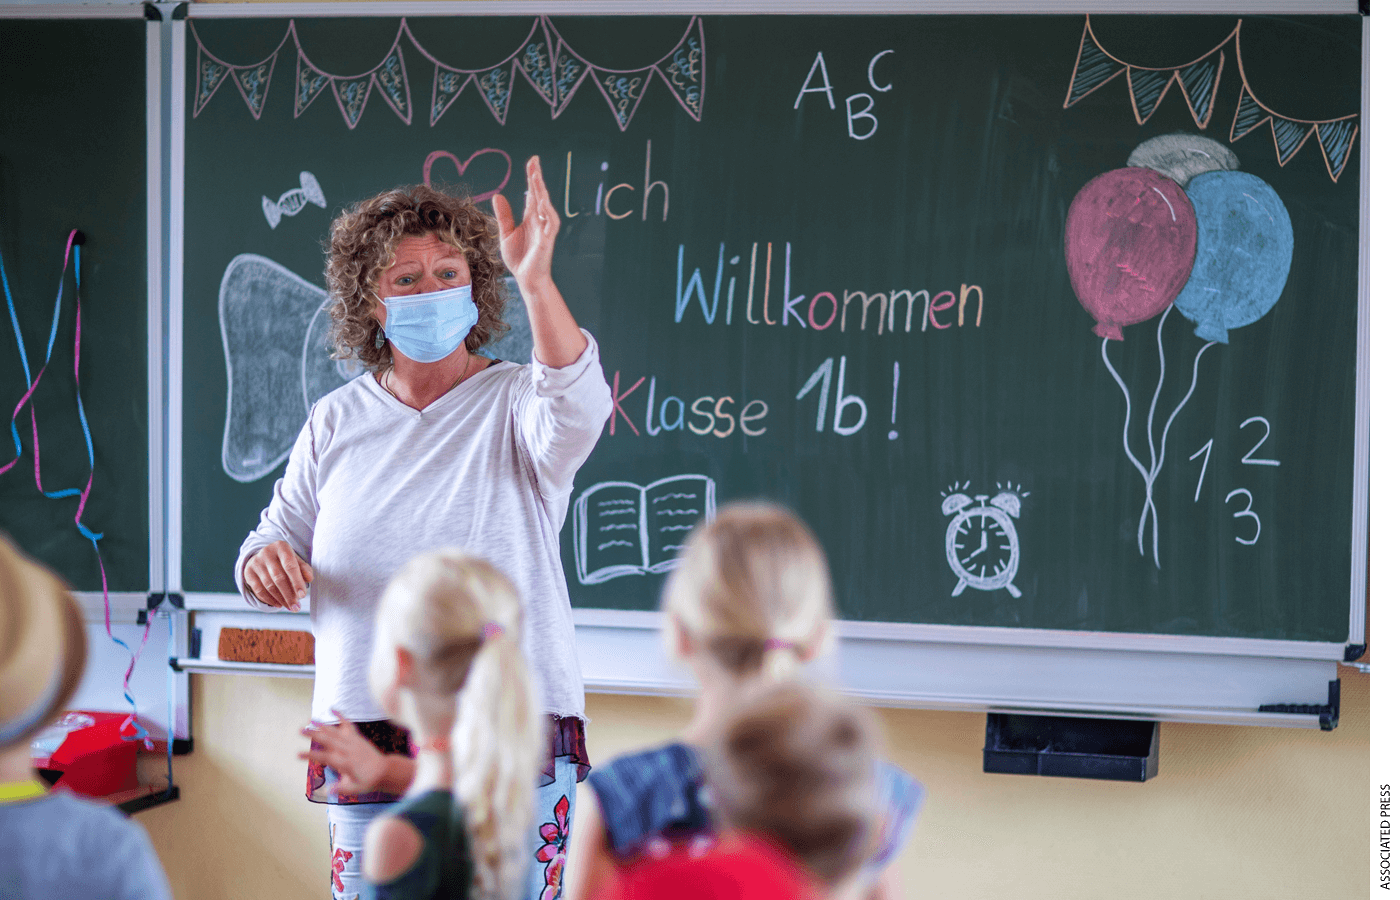 Teacher Ditte M'ller welcomes the pupils of class 1b in front of the blackboard in the classroom of the primary school "Werner Lindemann" on the first day of school in Mecklenburg-Western Pomerania, Germany, Aug. 2, 2021.